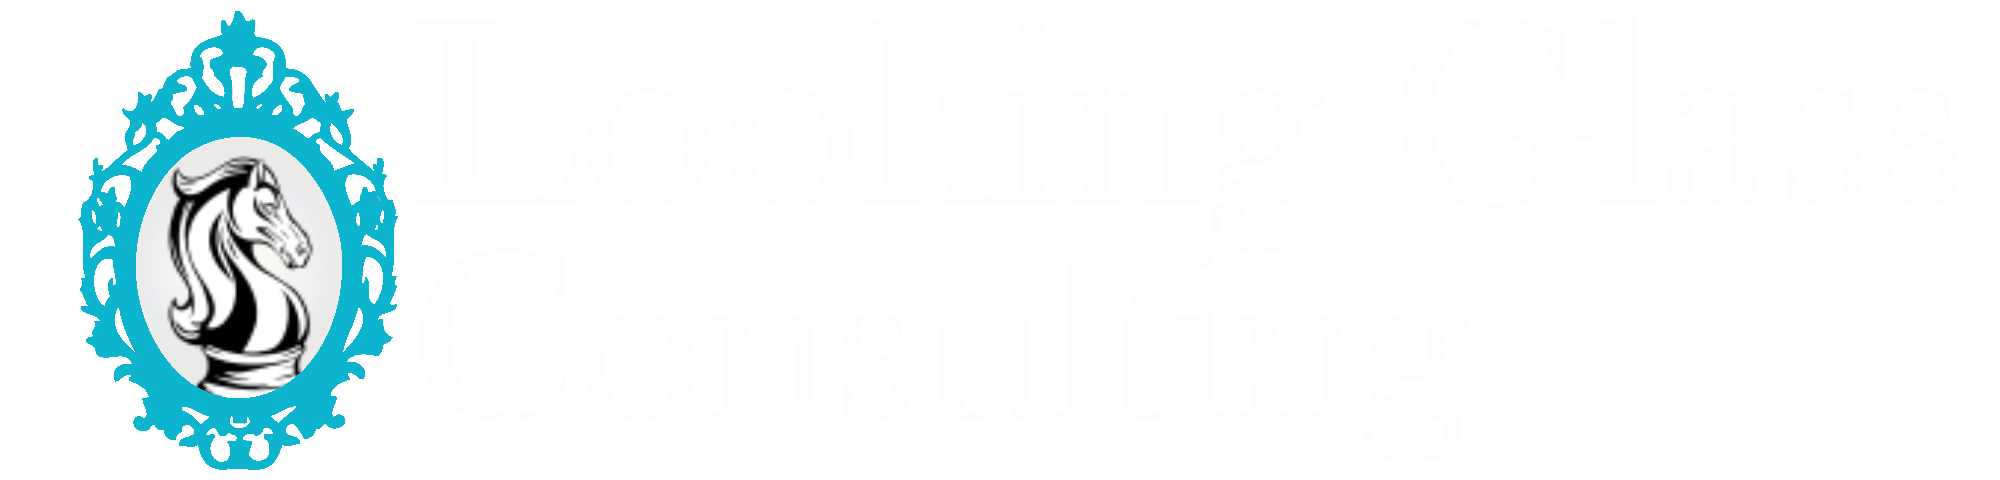 Looking Glass Consulting